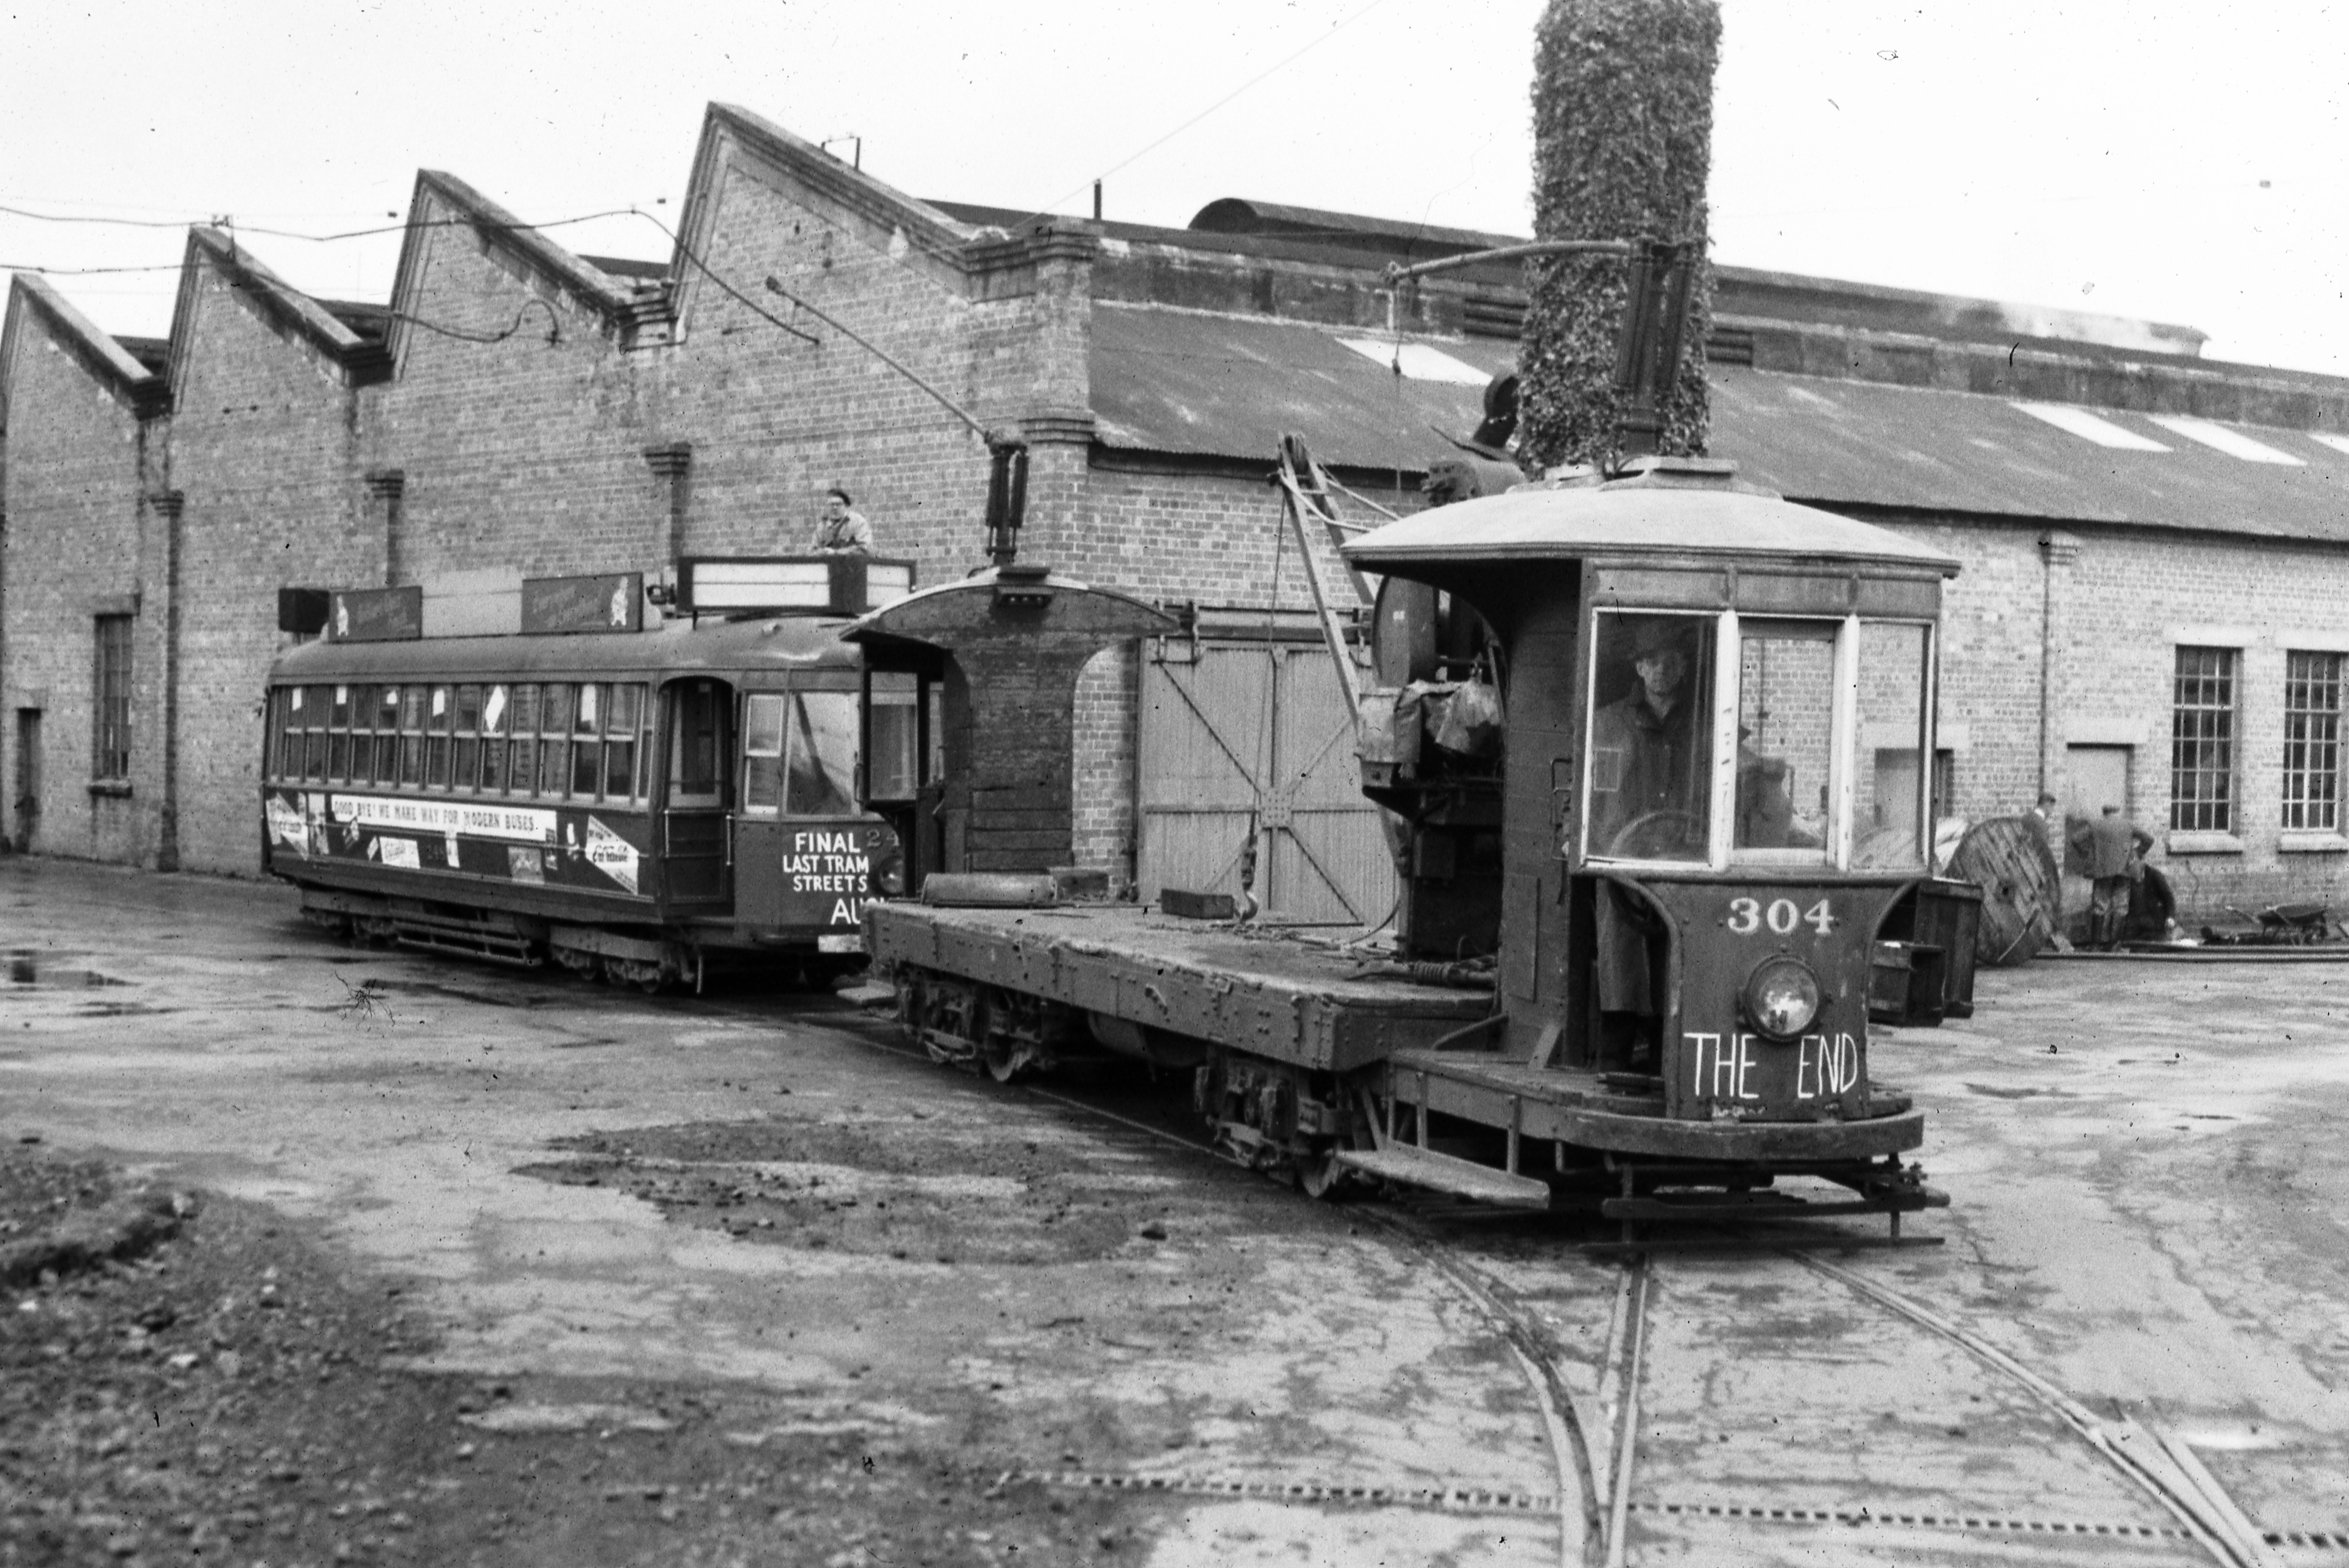 Graham Stewart. July 1957.  Freight and crane tram 304 towing 248 at the Manukau Road Workshops, ready for the journey to Matakohe, Te Tai Tokerau. No.304 becoming the last tram under power within the confines of the workshops on the original Auckland tram system. Supplied by David Cawood.  